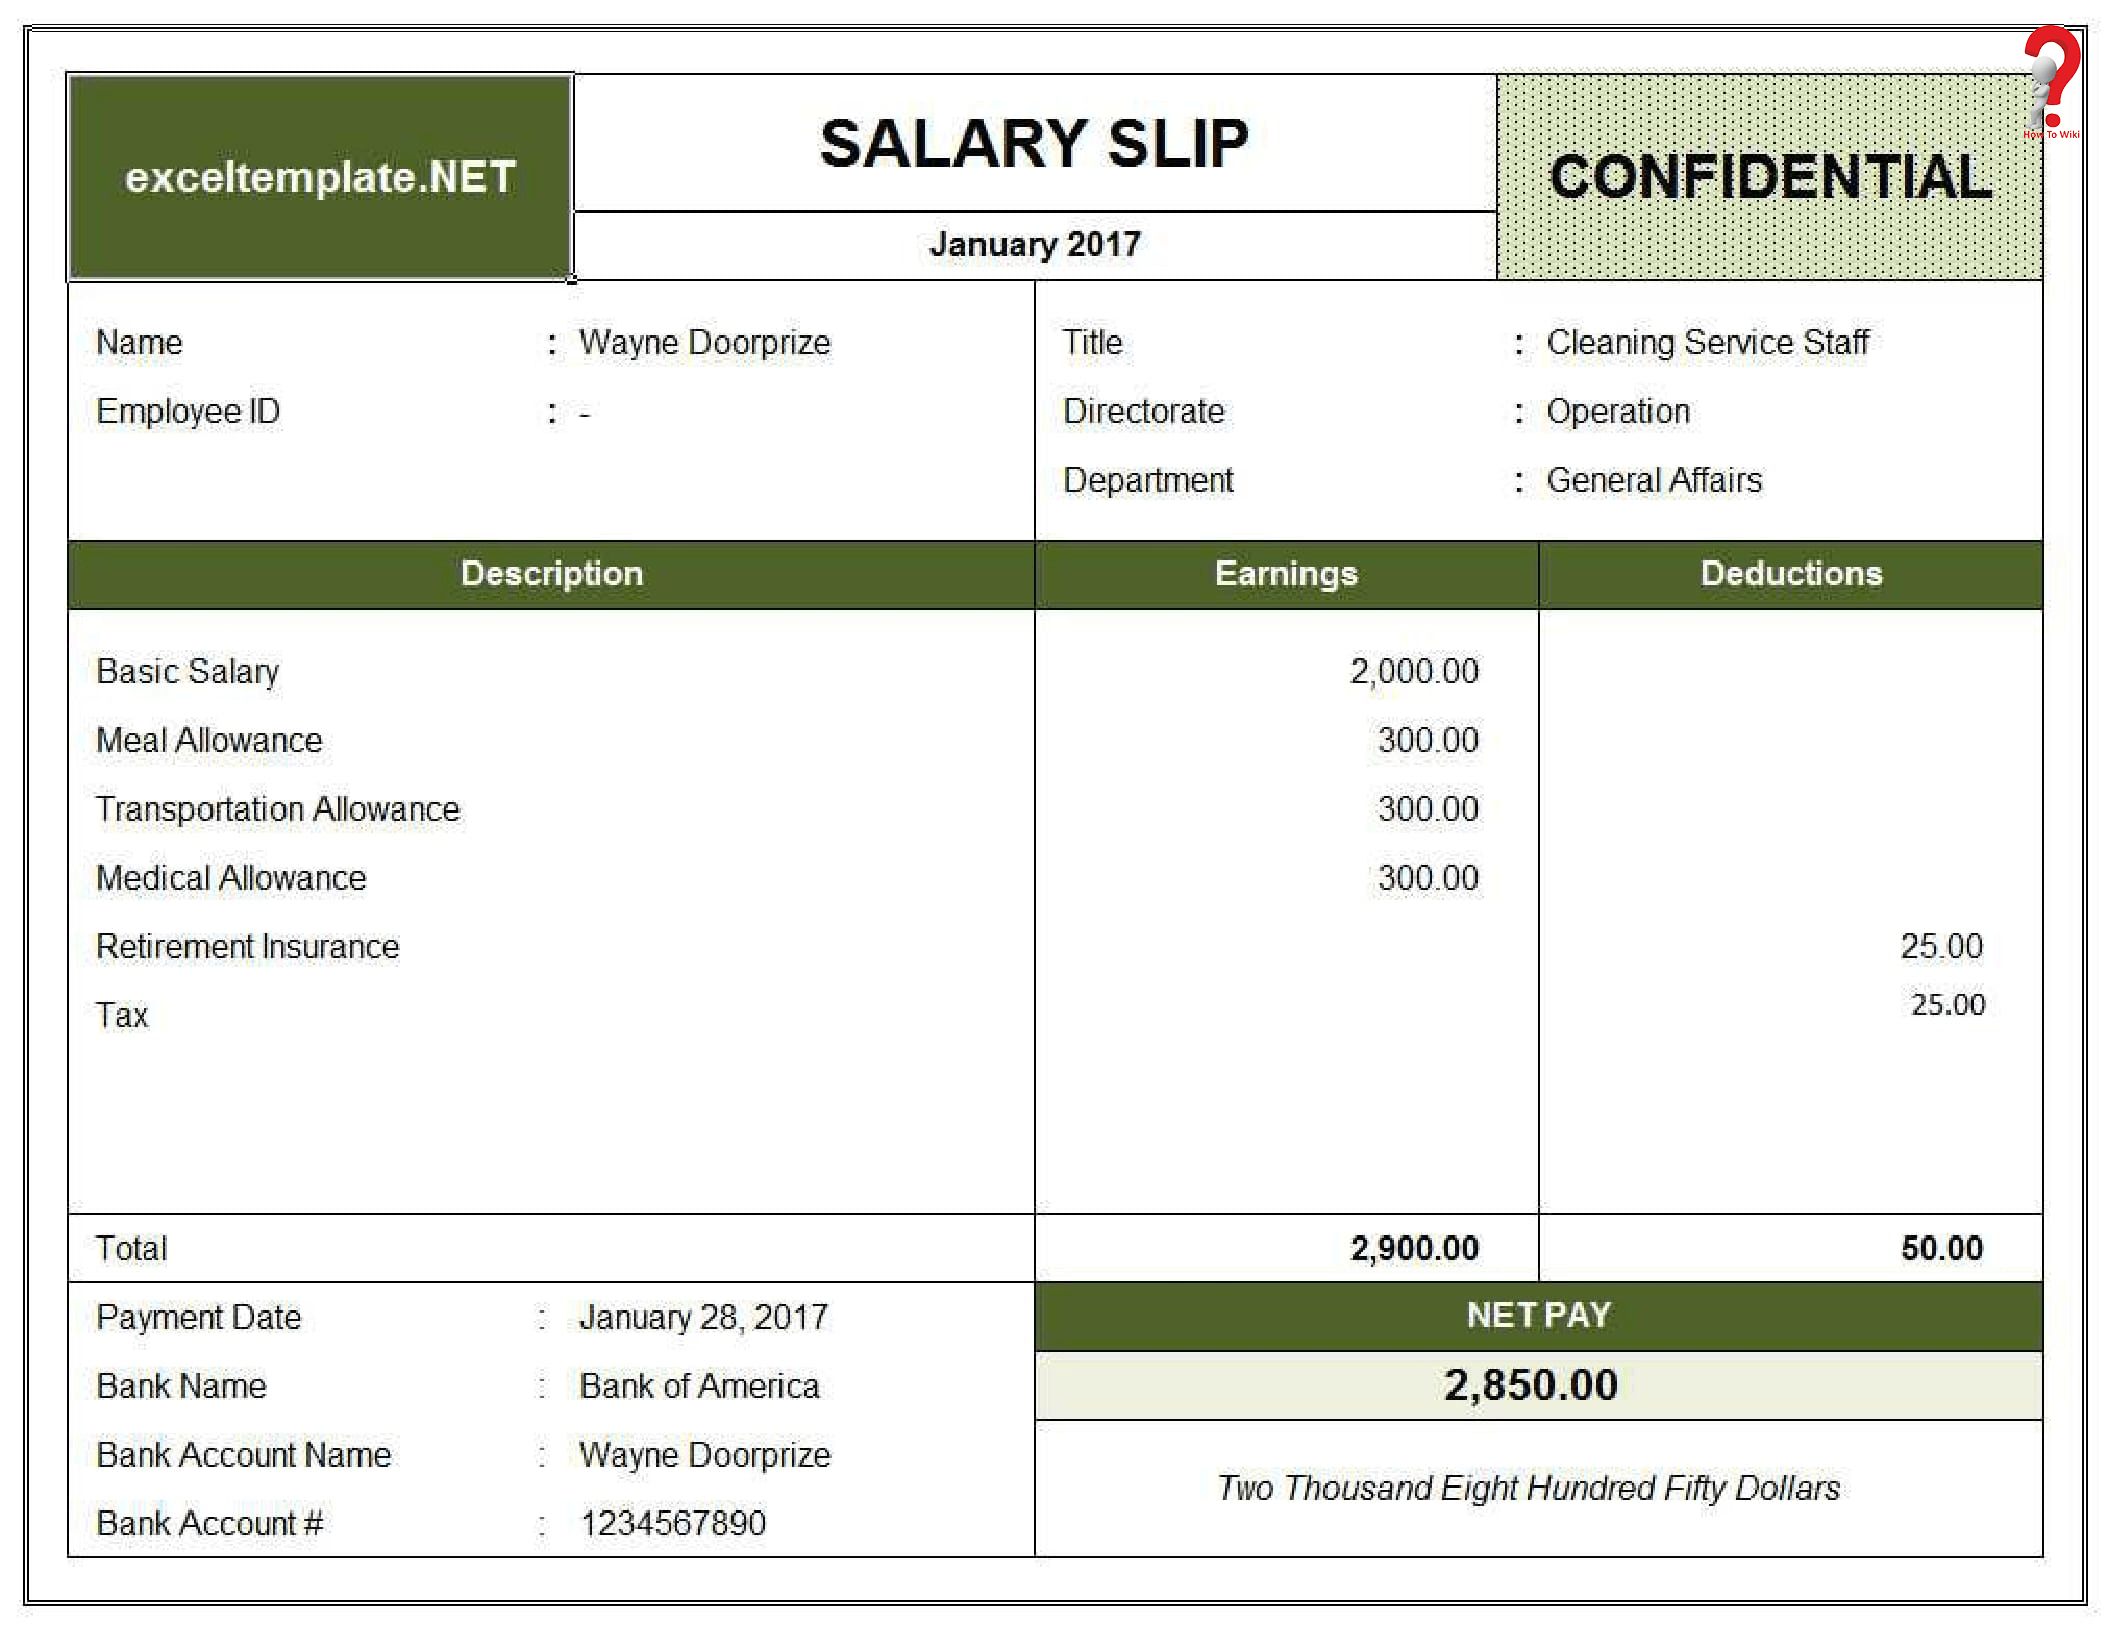 How To Make Salary Slip Format in PDF, Excel, Word | HowToWiki